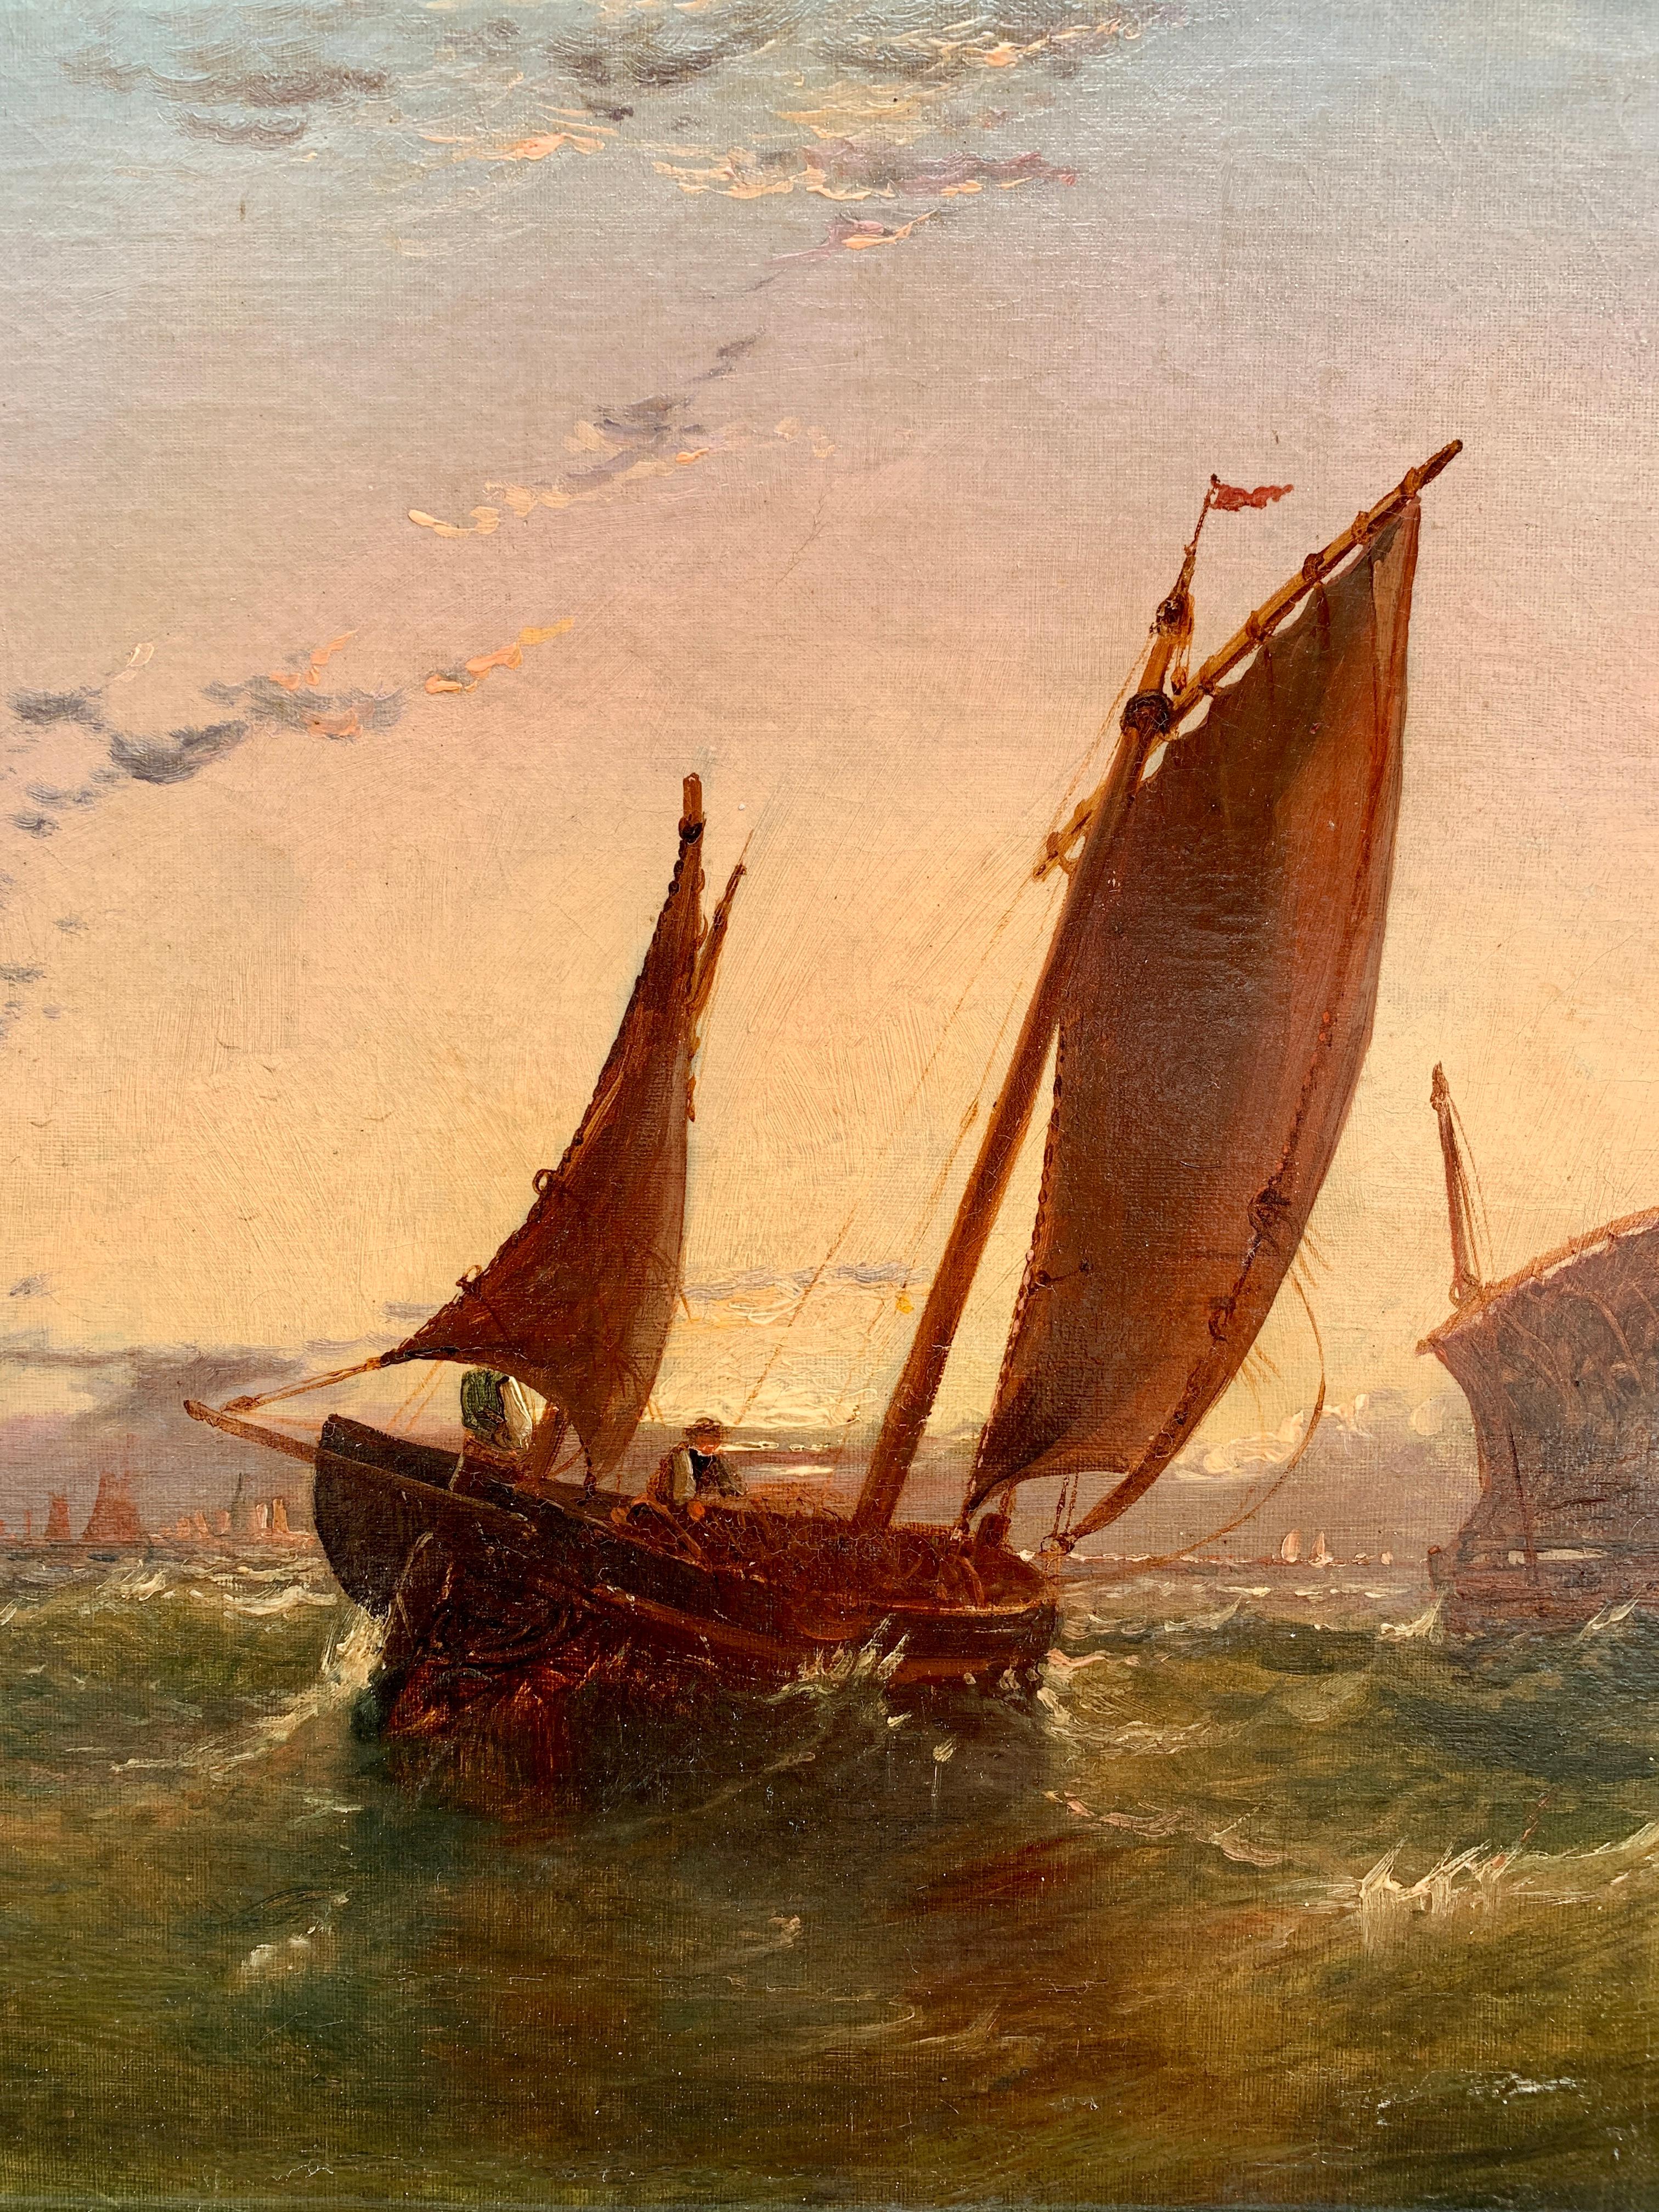 Antique English 19th century oil of fishing boats at sea, with the sun setting - Painting by Arthur Wilde Parsons 